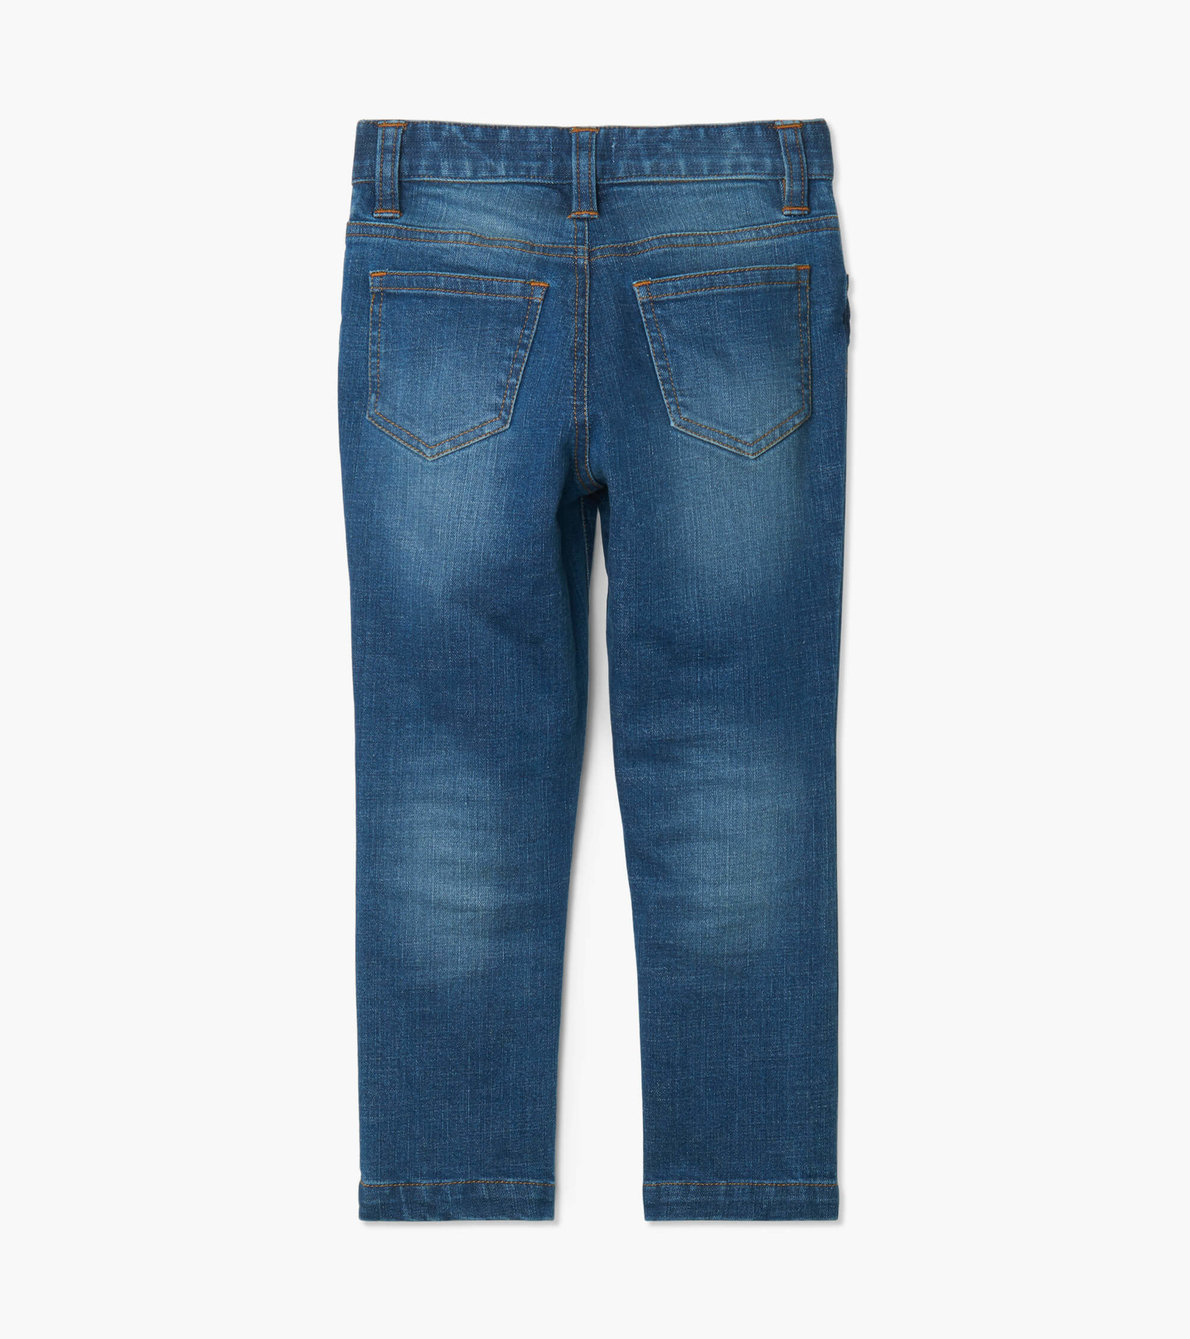 View larger image of Boys Classic Blue Jeans